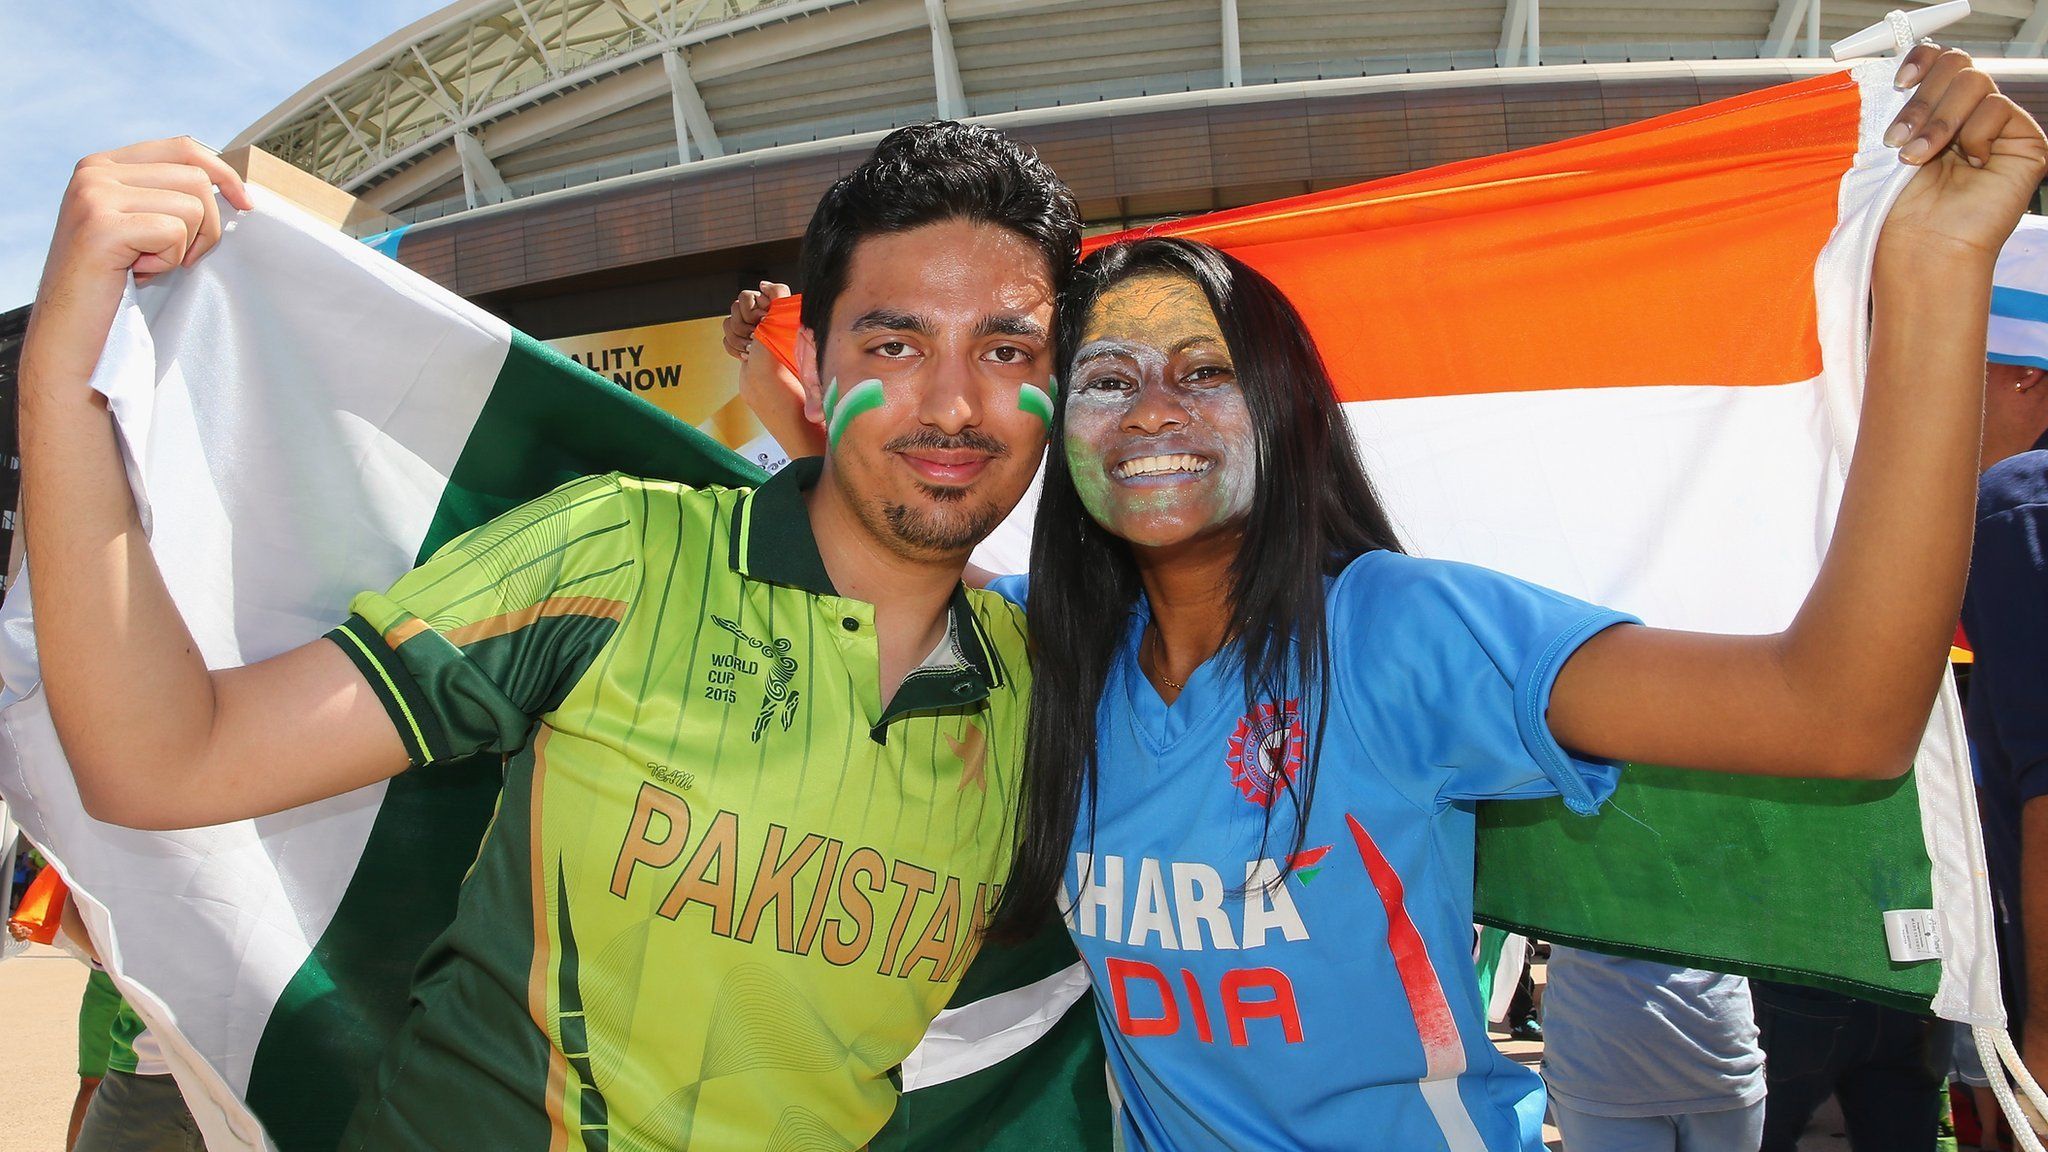 ICC Cricket World Cup 2019: India and Pakistan fans